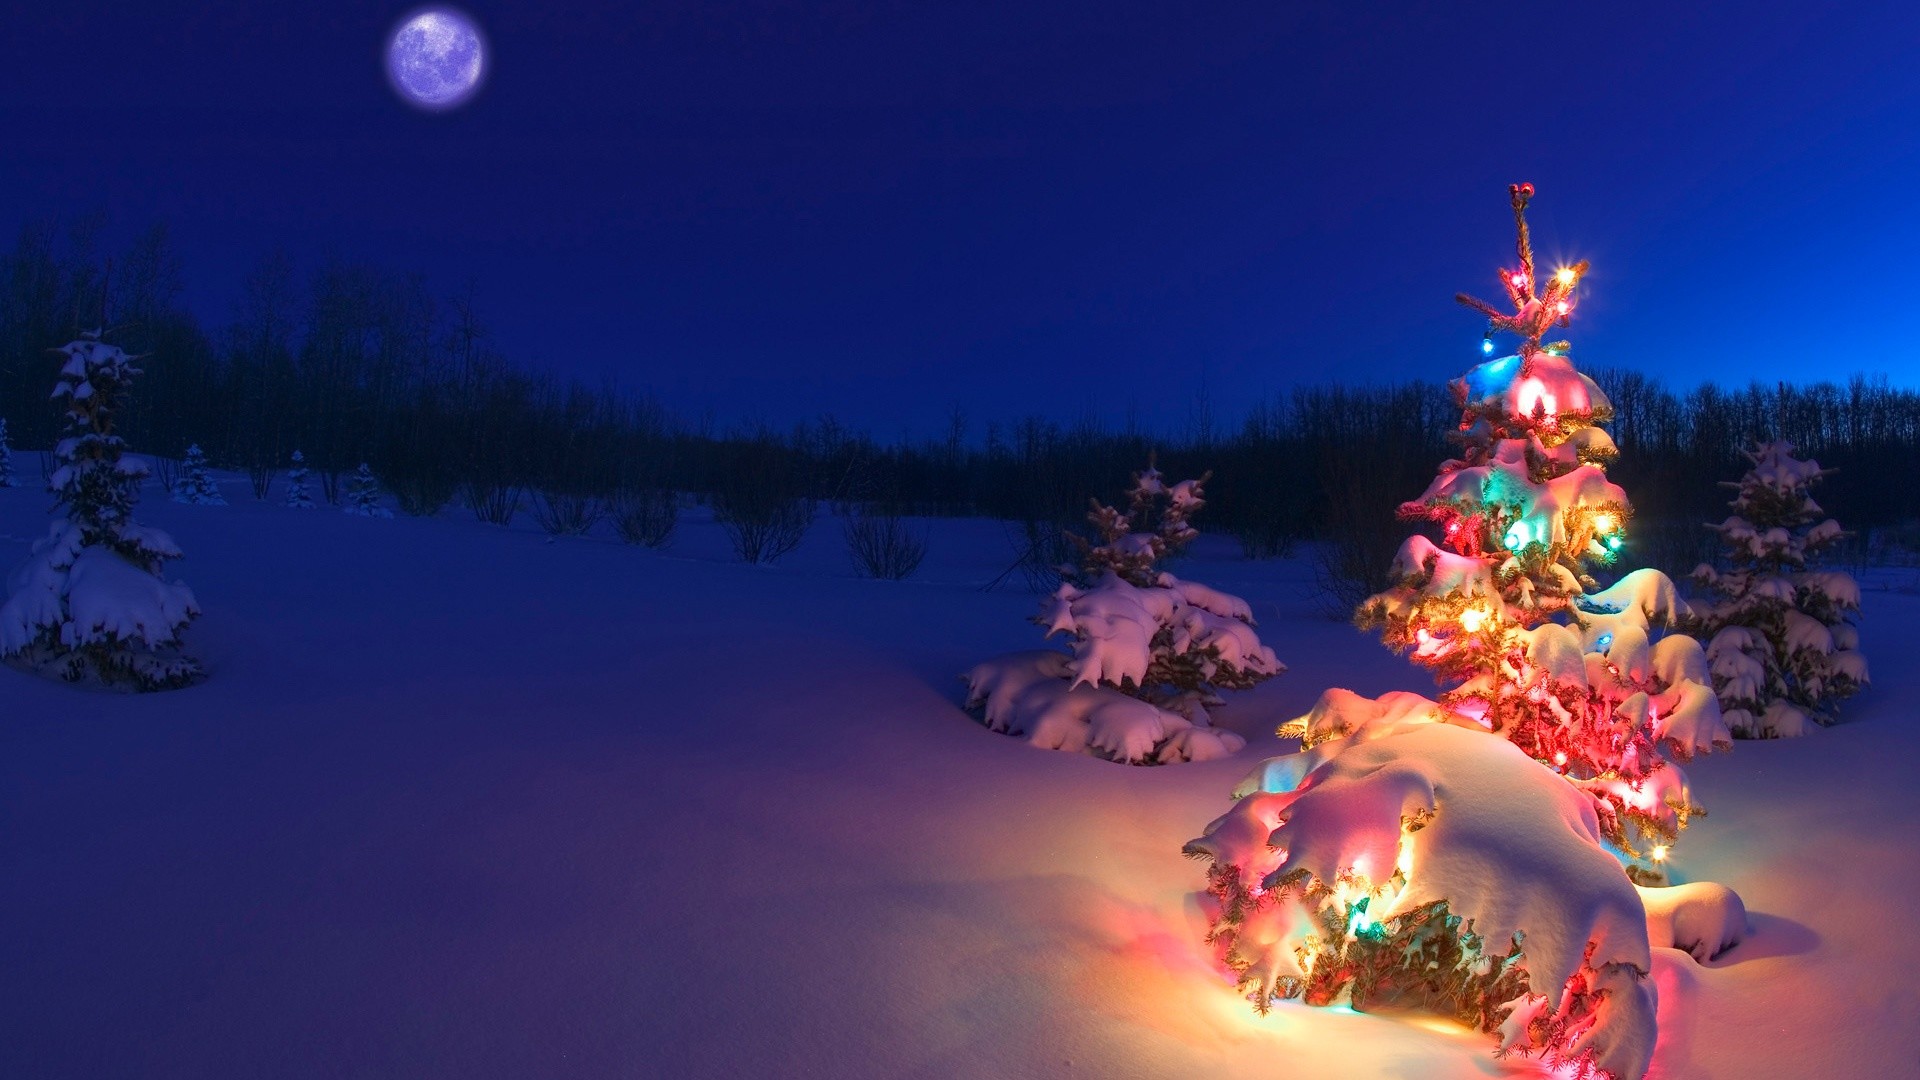 Download Merry Christmas HD Image Â· Merry Christmas hd Wallpapers …